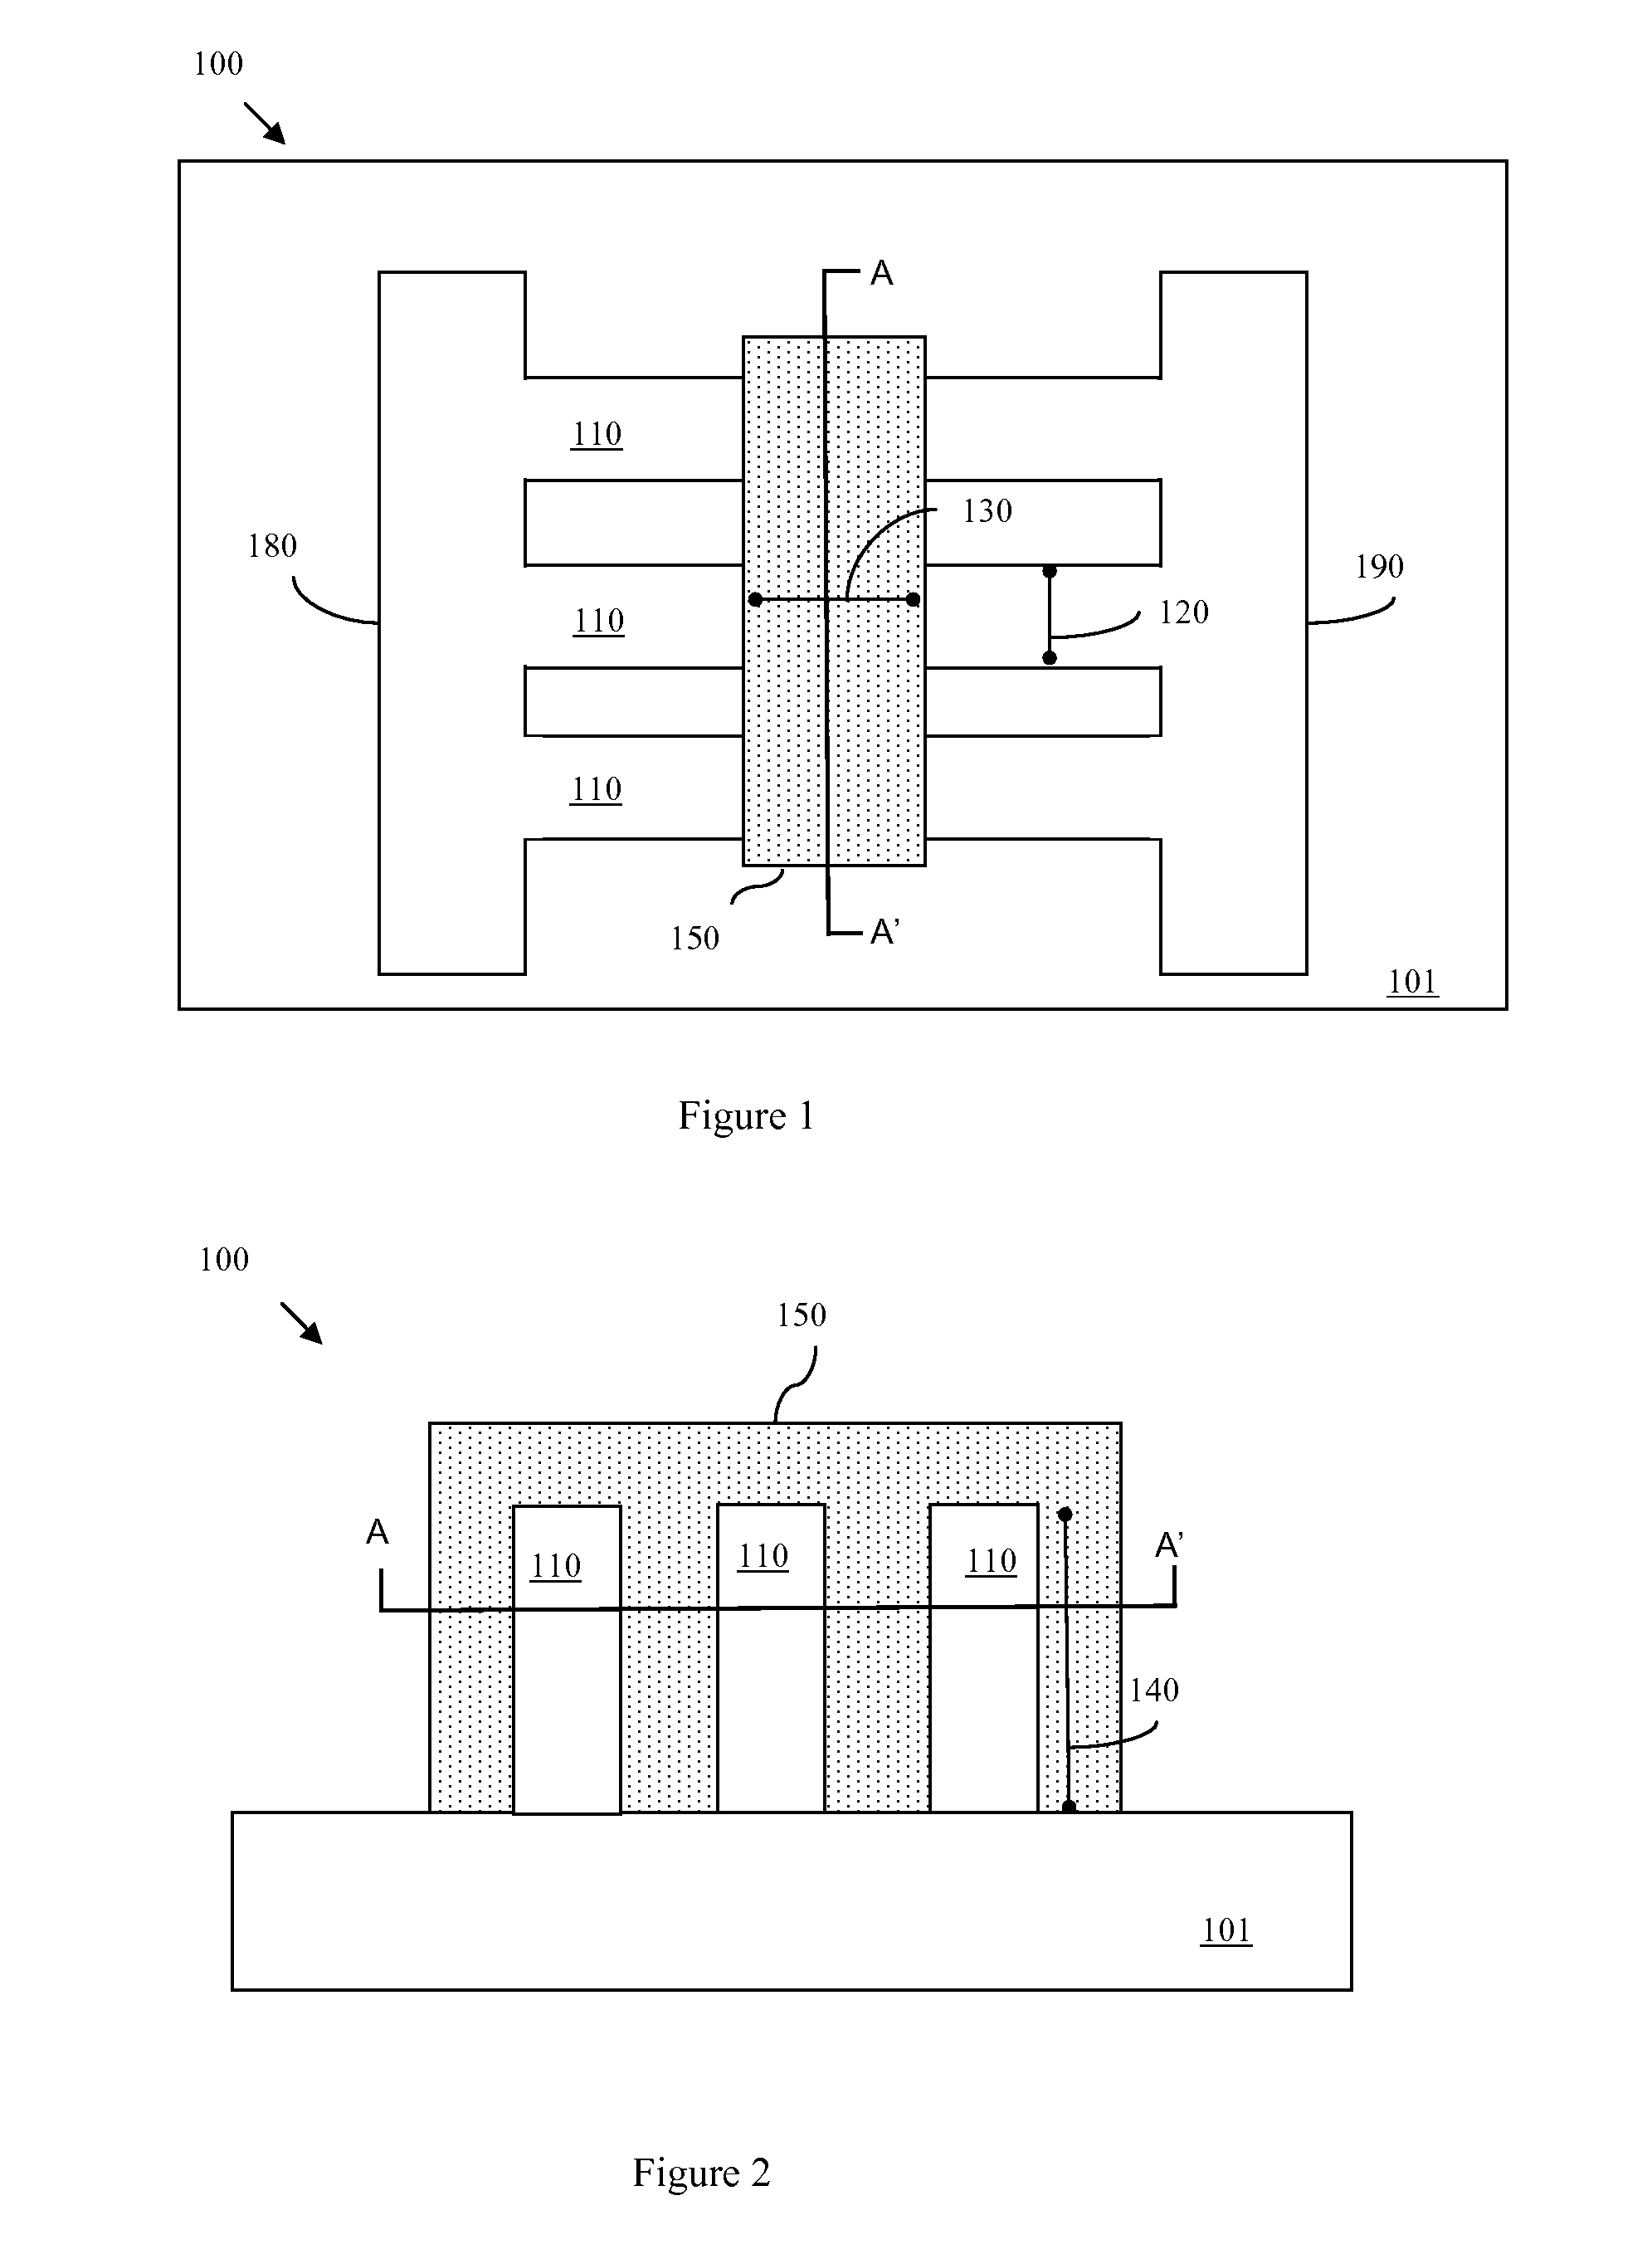 Method of forming a multi-fin multi-gate field effect transistor with tailored drive current